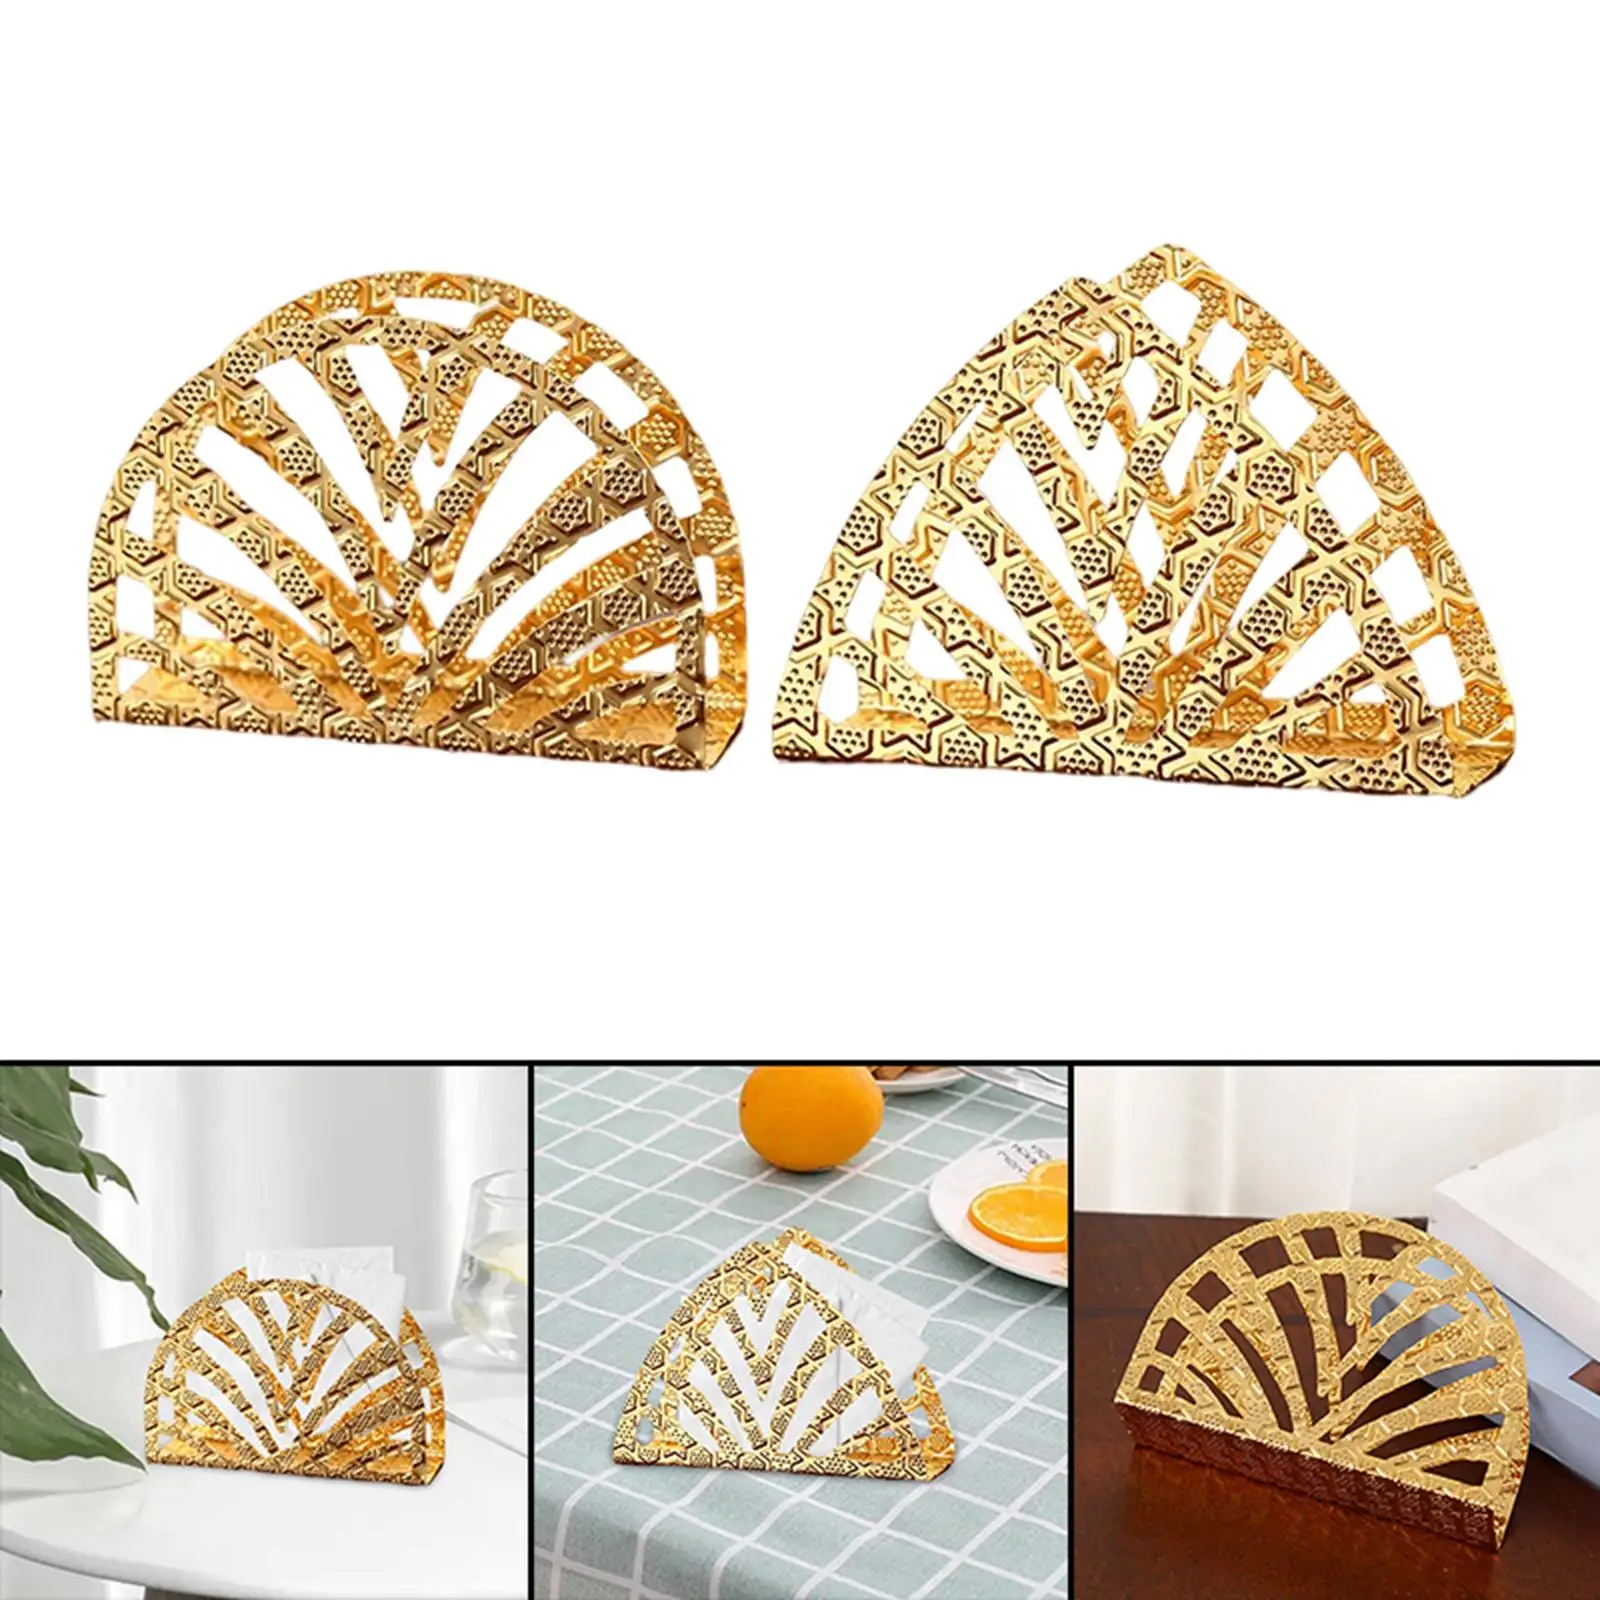 Table Napkin Holder European Style Stand Decorative Portable Gold Iron Tissue Dispenser for Hotel Office Home Decor Parties